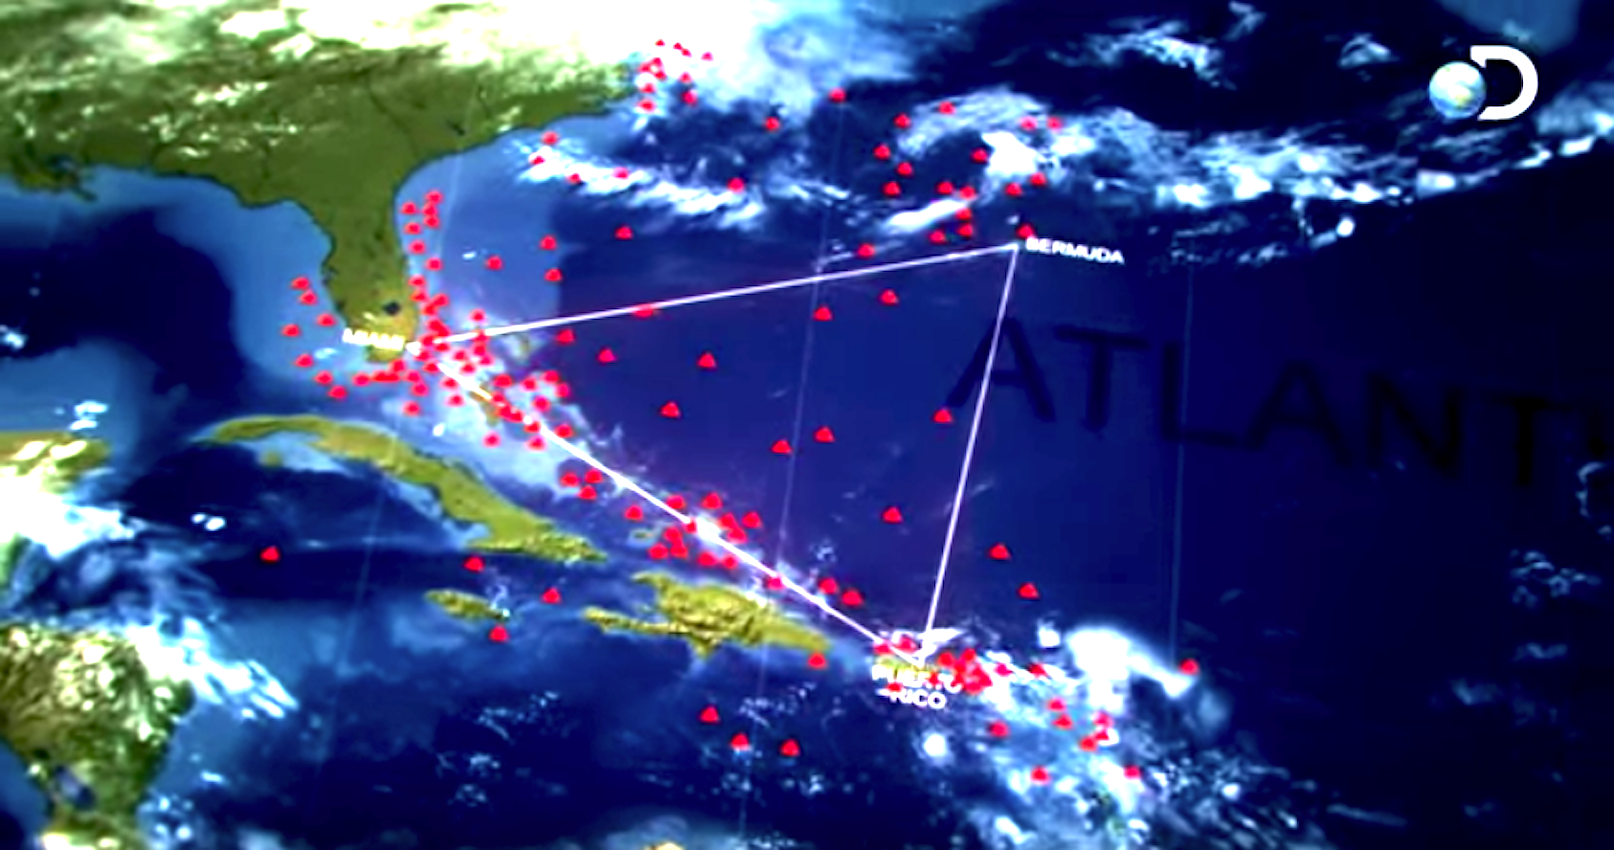 Aug 3 Scientists Claim To Have Solved The Mystery Of The Bermuda Triangle